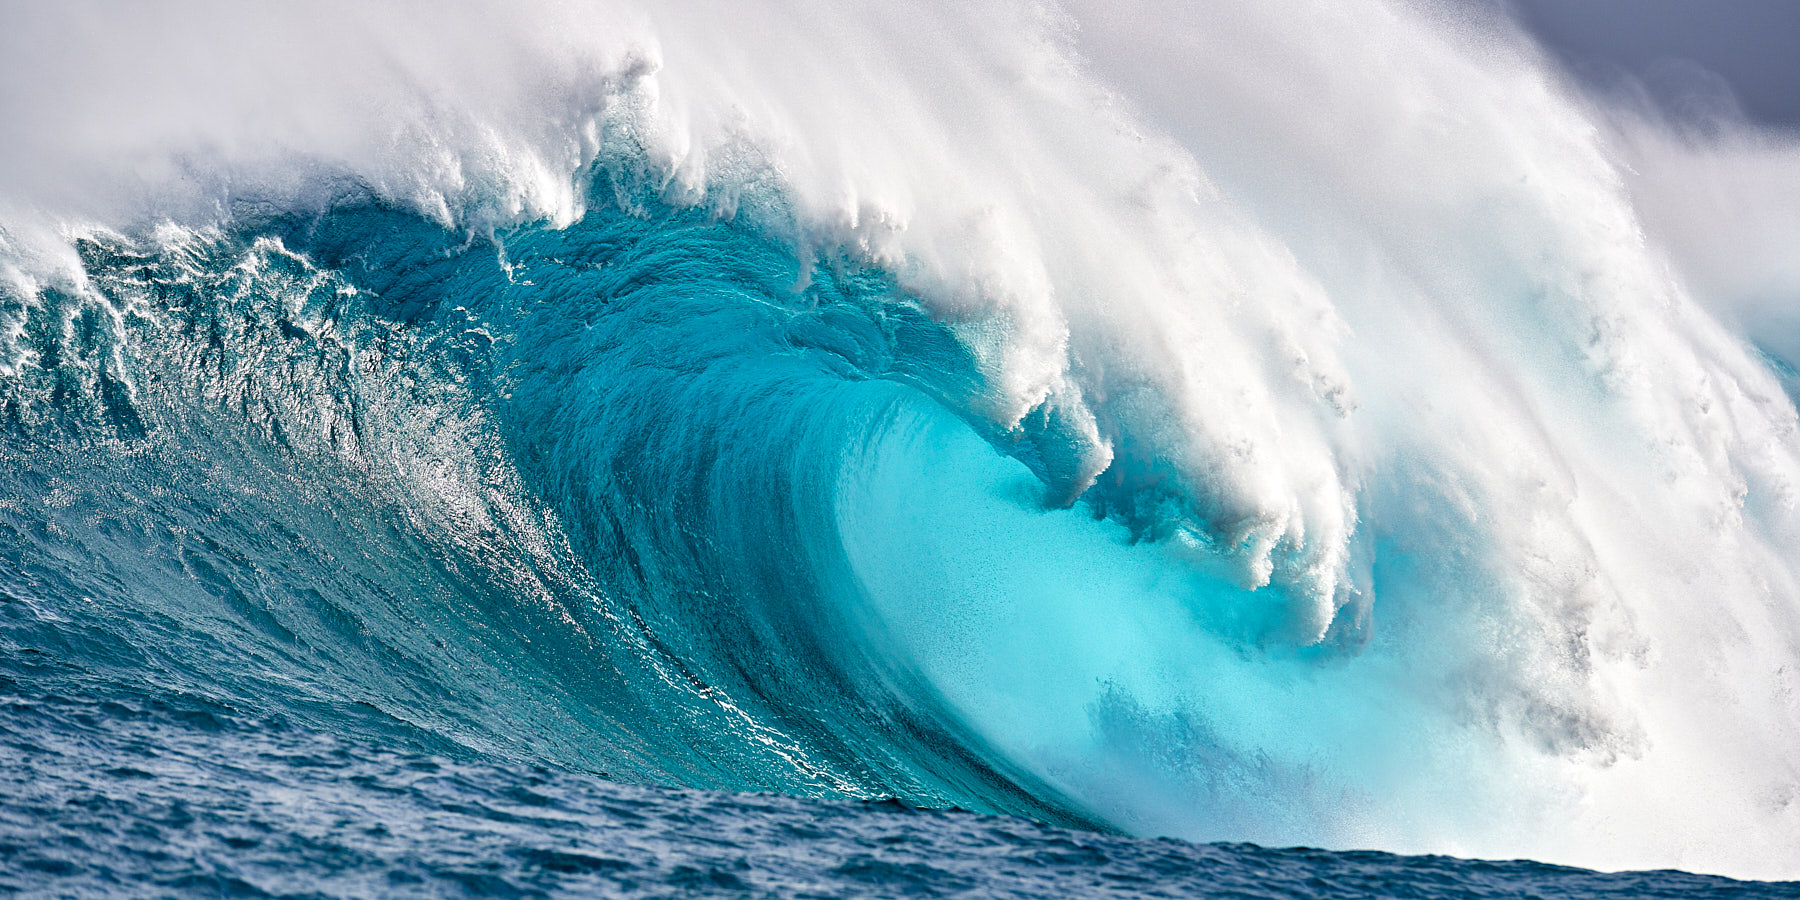 panoramic image of the biggest wave in Hawaii,  Jaws located on the island of Maui reaches heights up to seventy feet.  Hawaii big wave photography